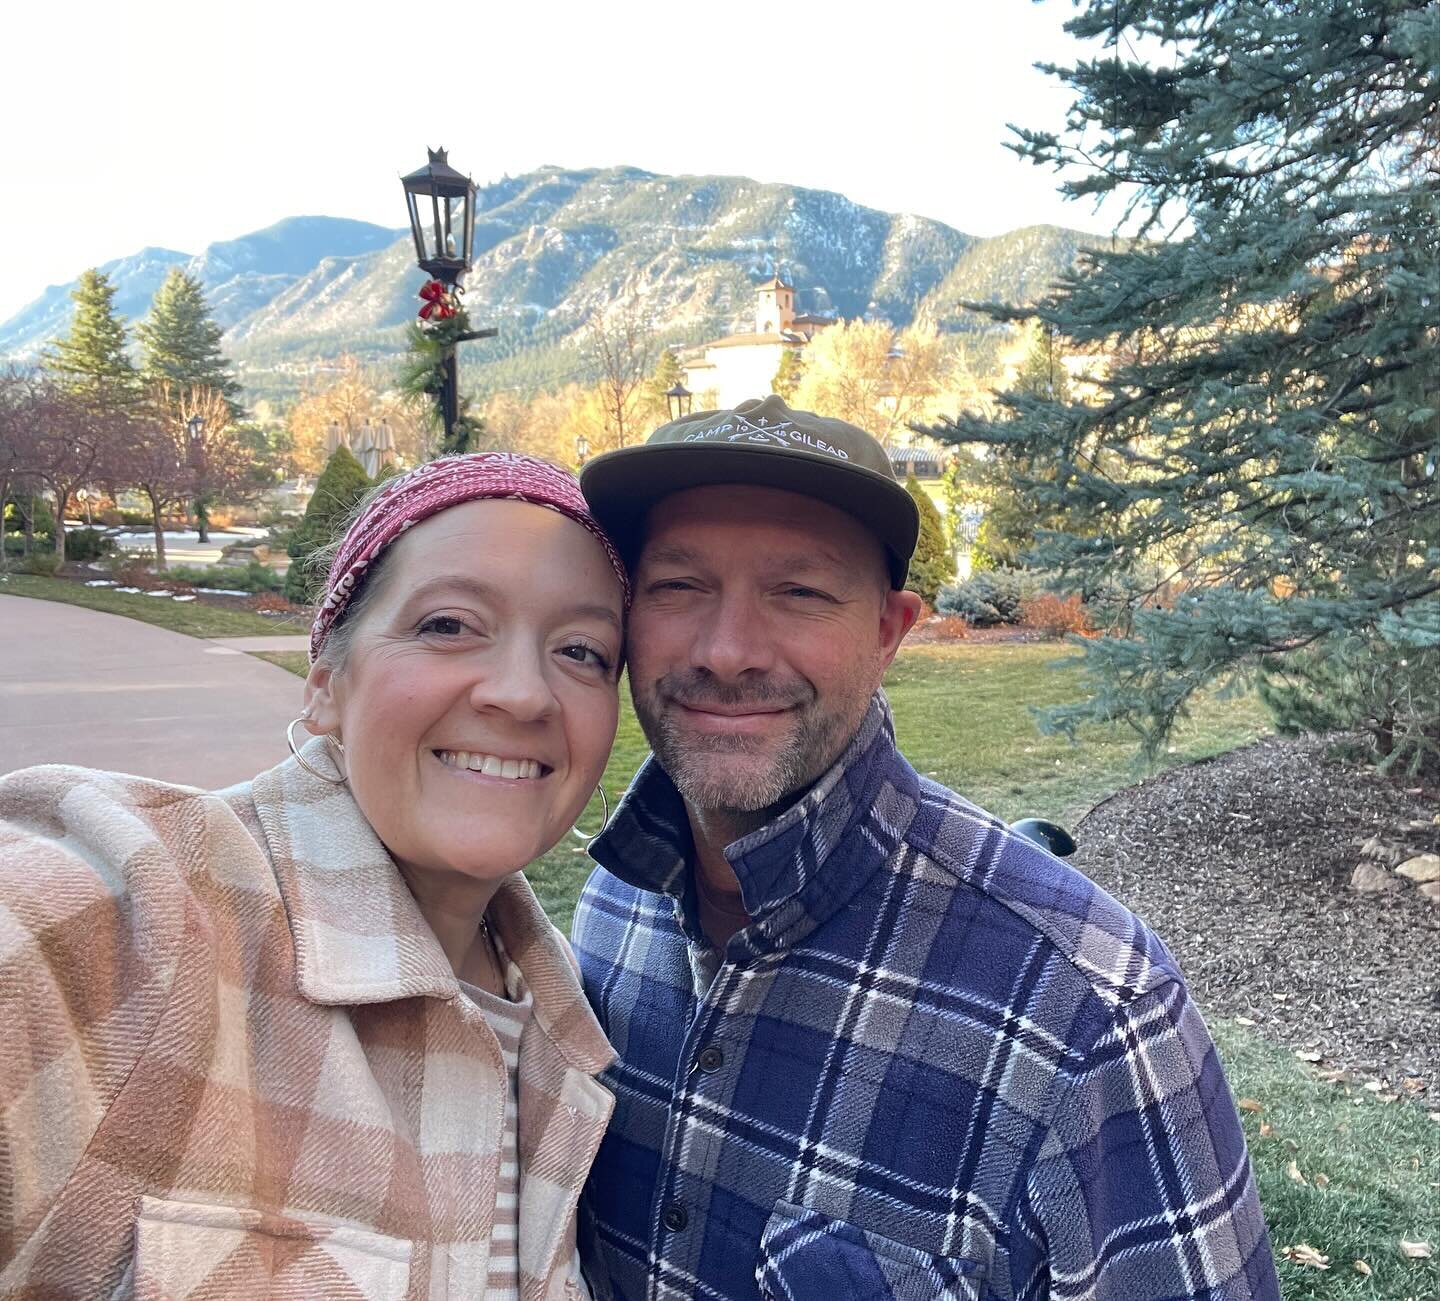 The Gilead team has arrived at the Broadmoor in Colorado Springs - ready for a time of learning, growing and being challenged at the Christian Camping Conference!  @ccca.1963 @ccca_nw #seenandknown23